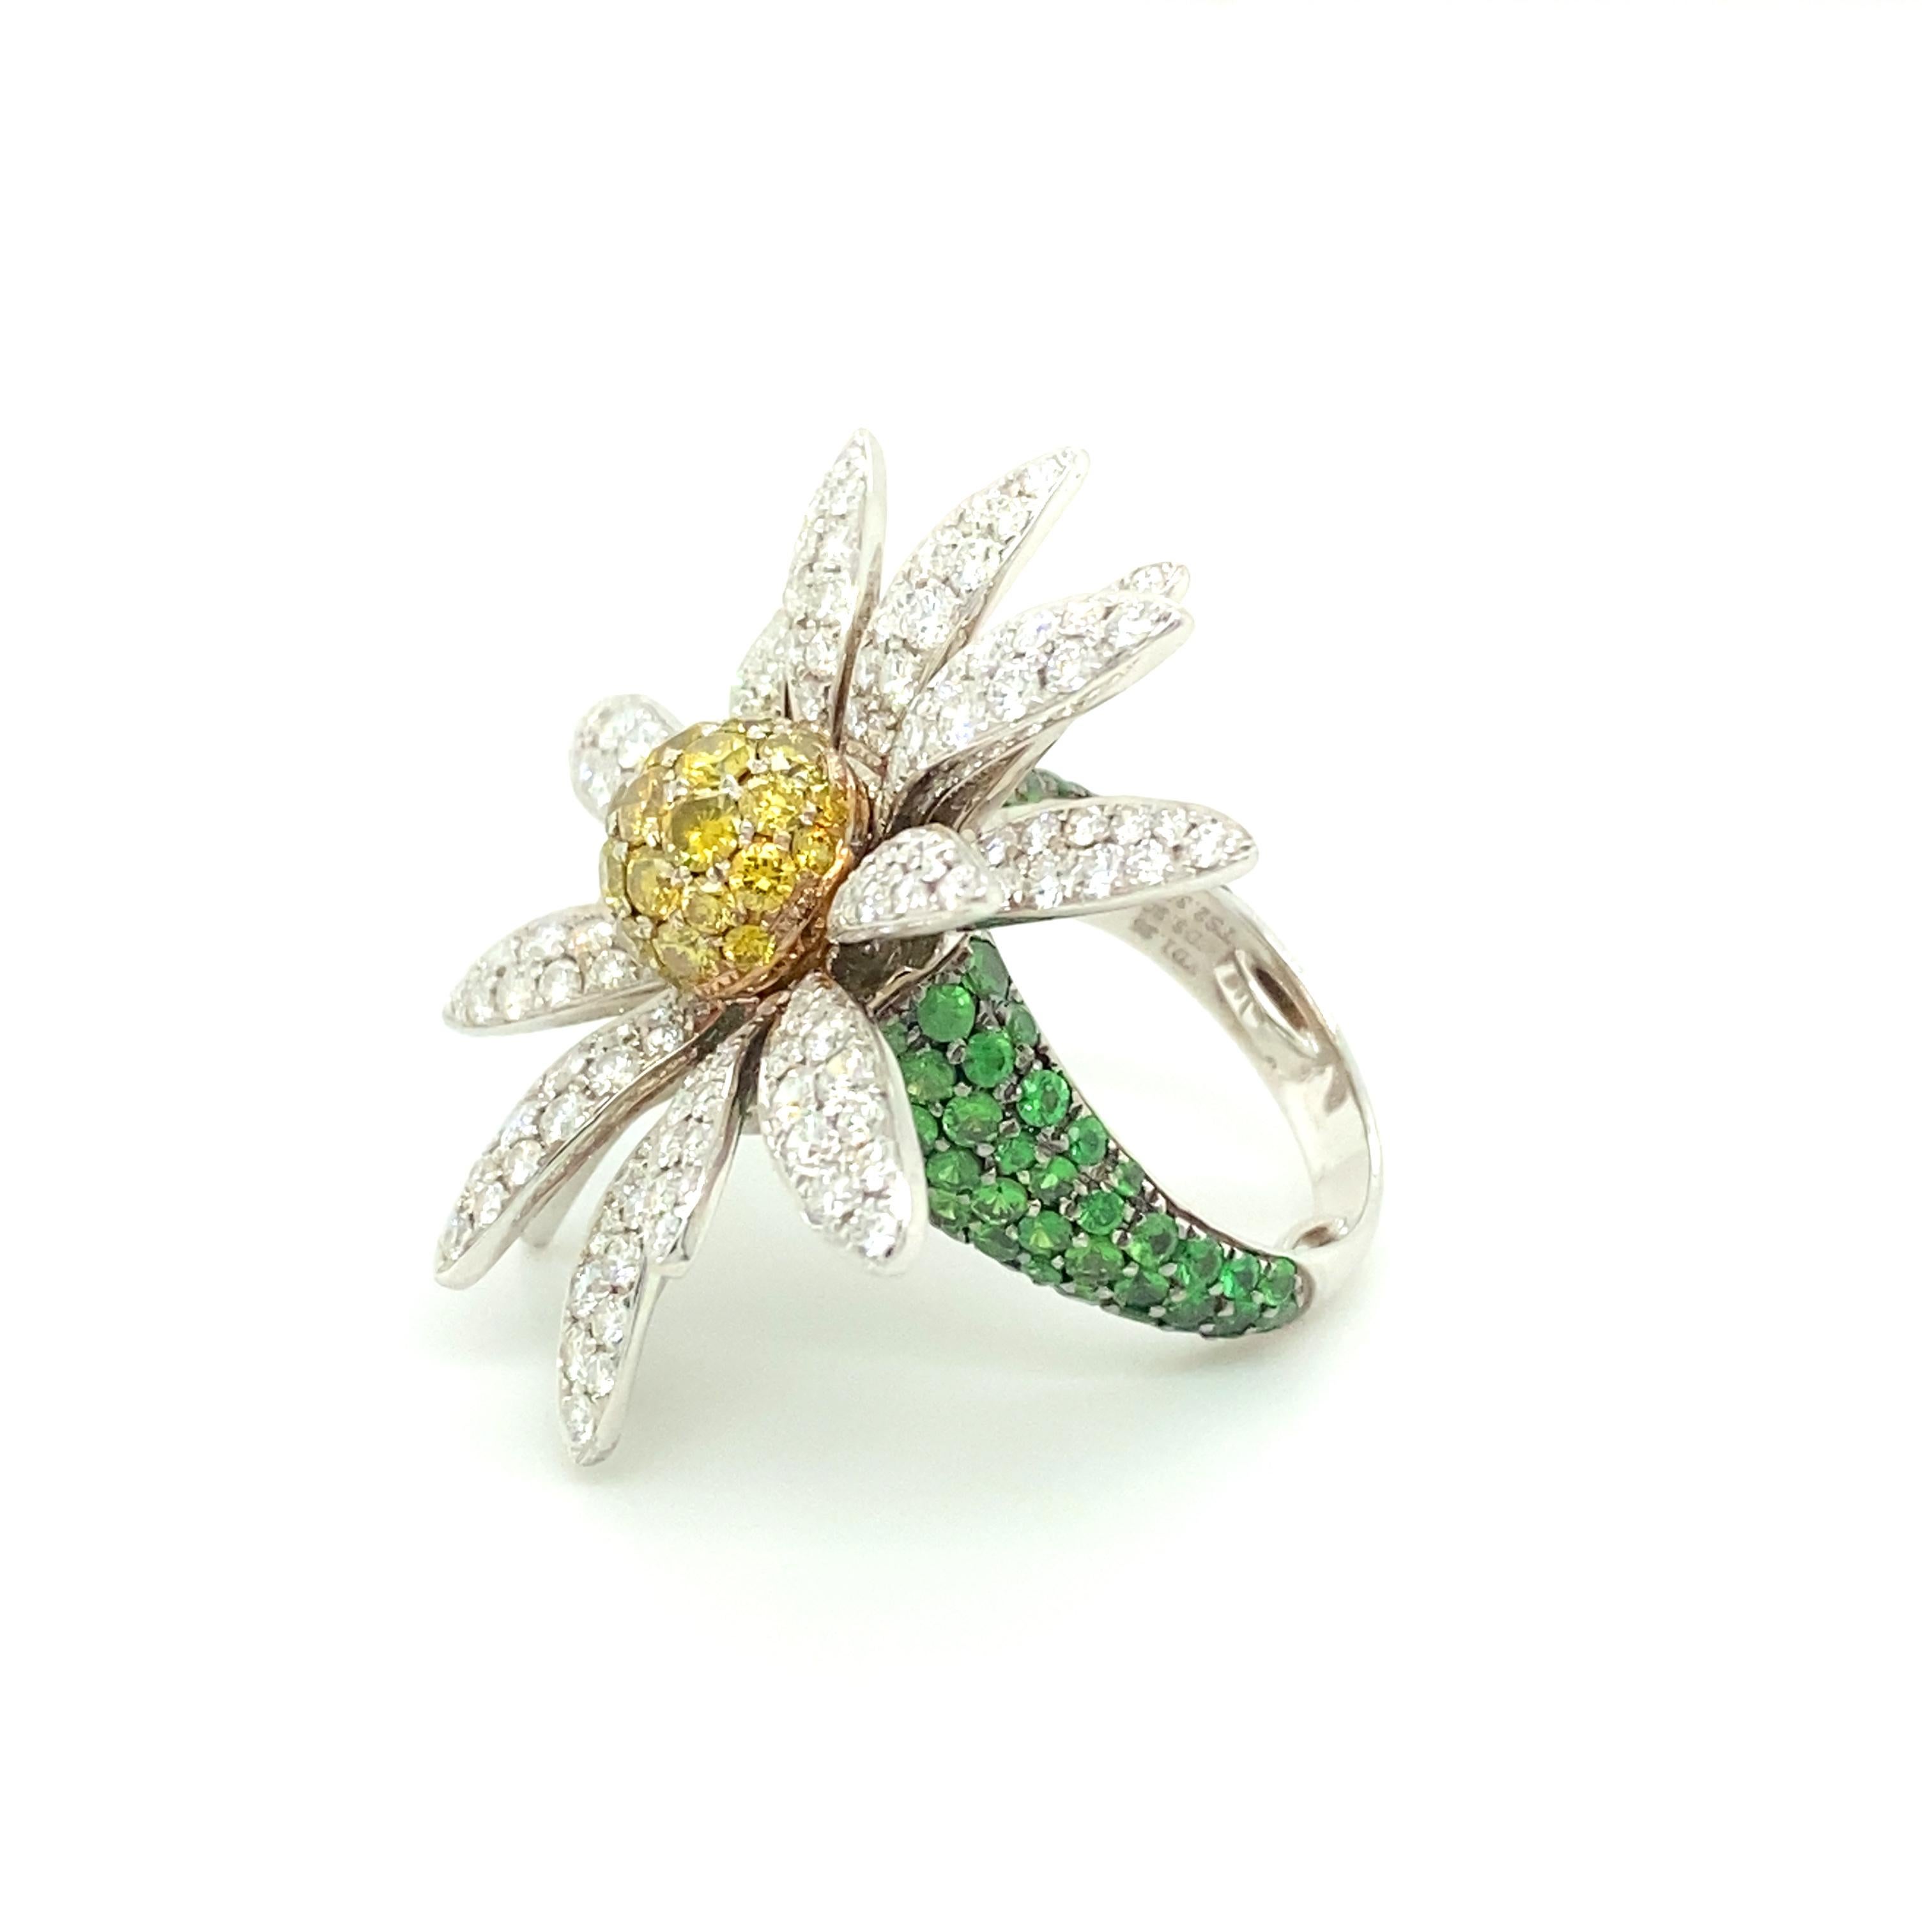 Daisy Ring with Diamonds and Tsavorites in 18 Karat White Gold by SILLAM 1835 3